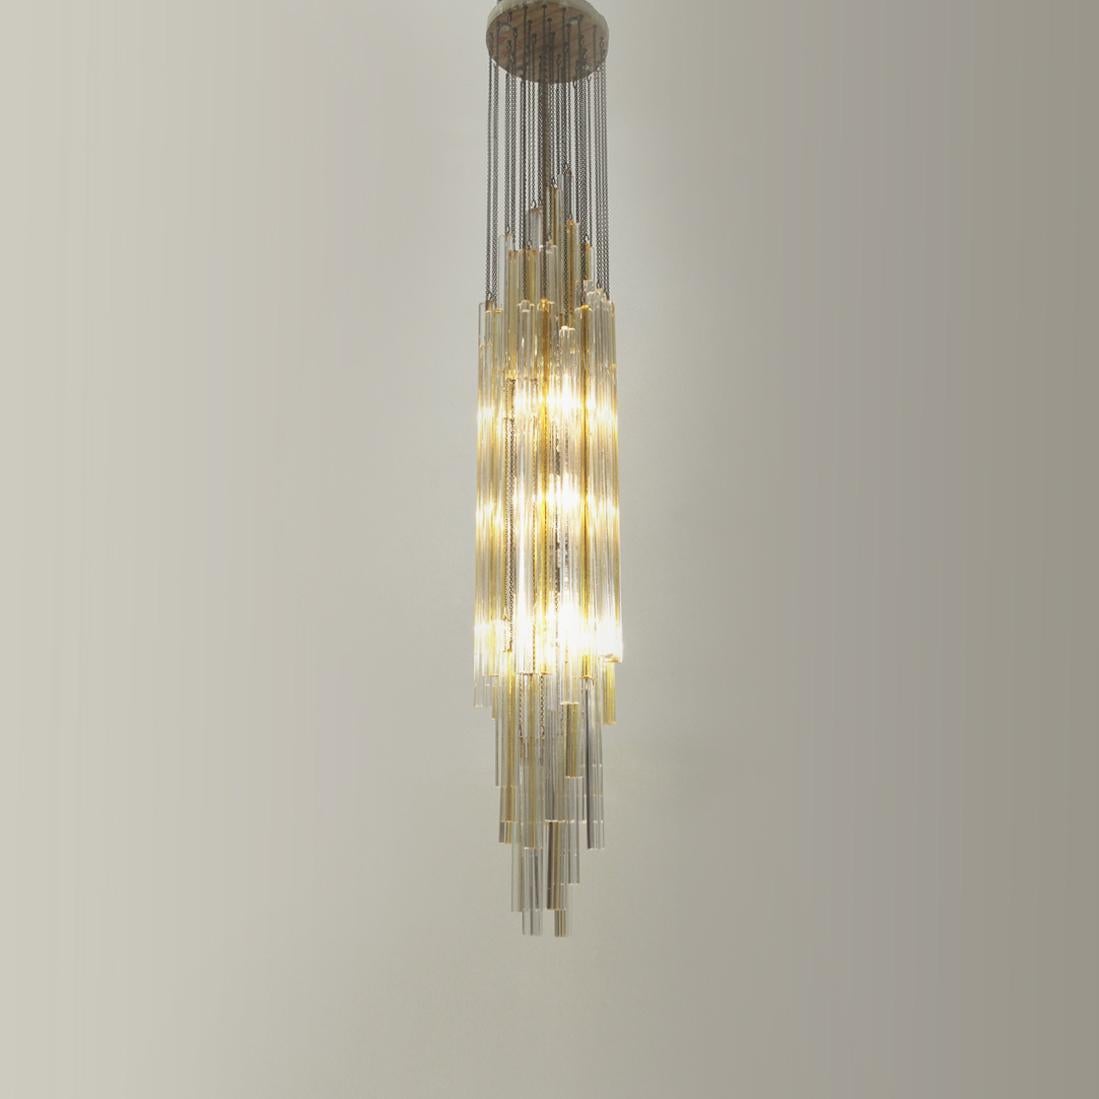 Chandelier produced in the 60s by Venini.
Rosette in white painted metal.
Crystal trilobes, transparent and yellow, of various heights.
Structure in good condition, small faults on the edge of the rosette with discolored paint.
We have inserted an